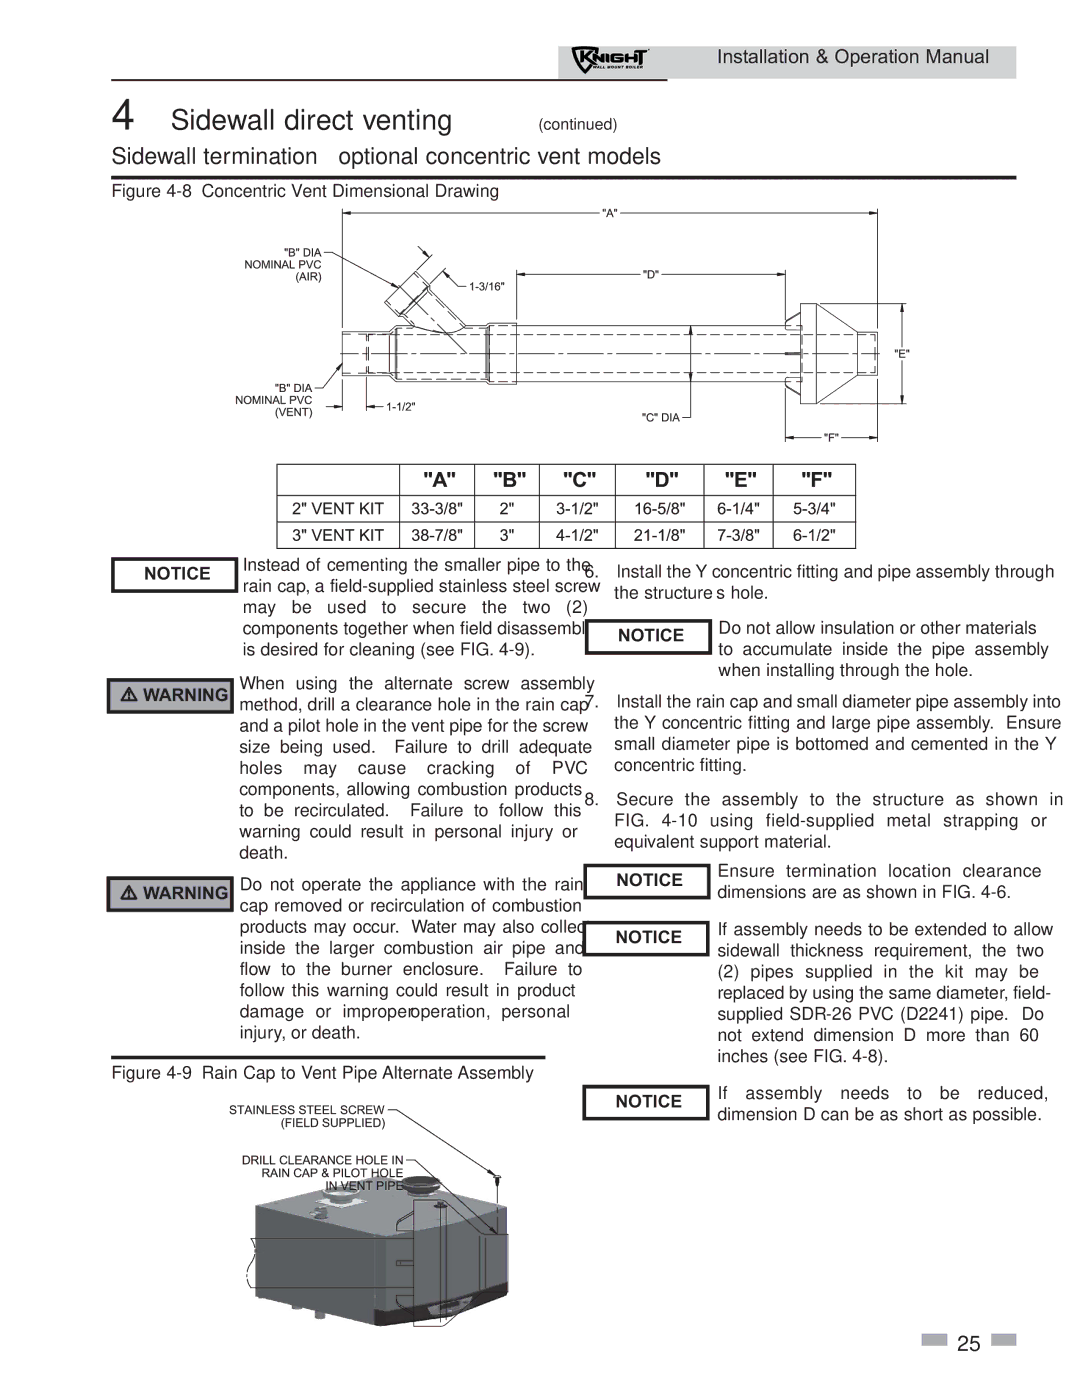 Lochinvar 51 operation manual Sidewall termination optional concentric vent models, 8Concentric Vent Dimensional Drawing 